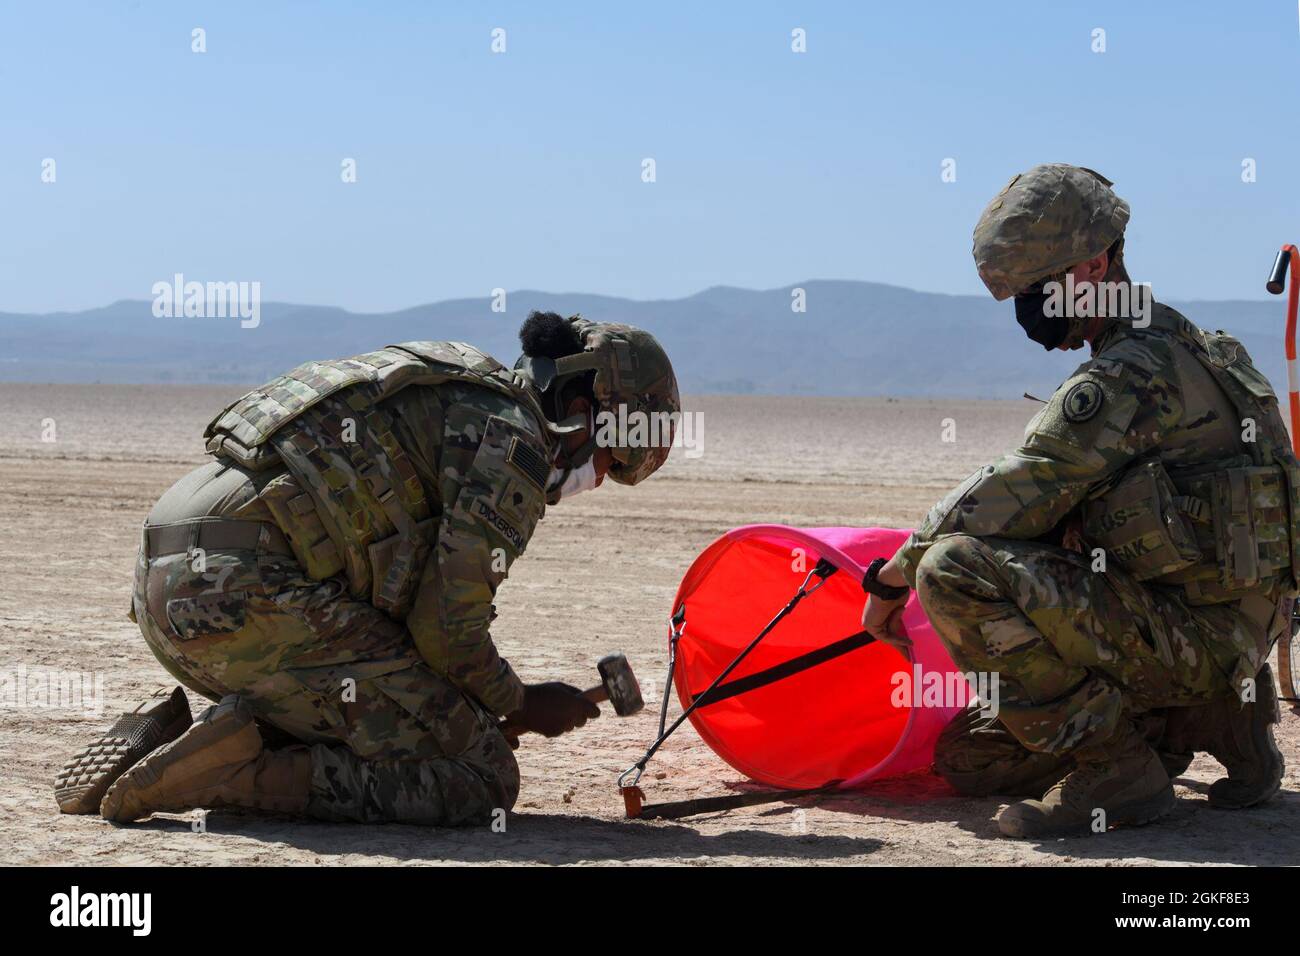 .S. Army Spc. Alexus Dickerson (left) and Sgt. Ethan Castle (right), air traffic control (ATC) operators with the 2nd Battalion, 111th Aviation Regiment in support of Combined Joint Task Force-Horn of Africa (CJTF-HOA), set up a VS-17 panel marker at Grand Bara, Djibouti, April 7, 2021. The team set up various VS-17 panel markers in order to mark a landing zone for a C-130 Hercules aircraft during a low-level landing exercise. Stock Photo